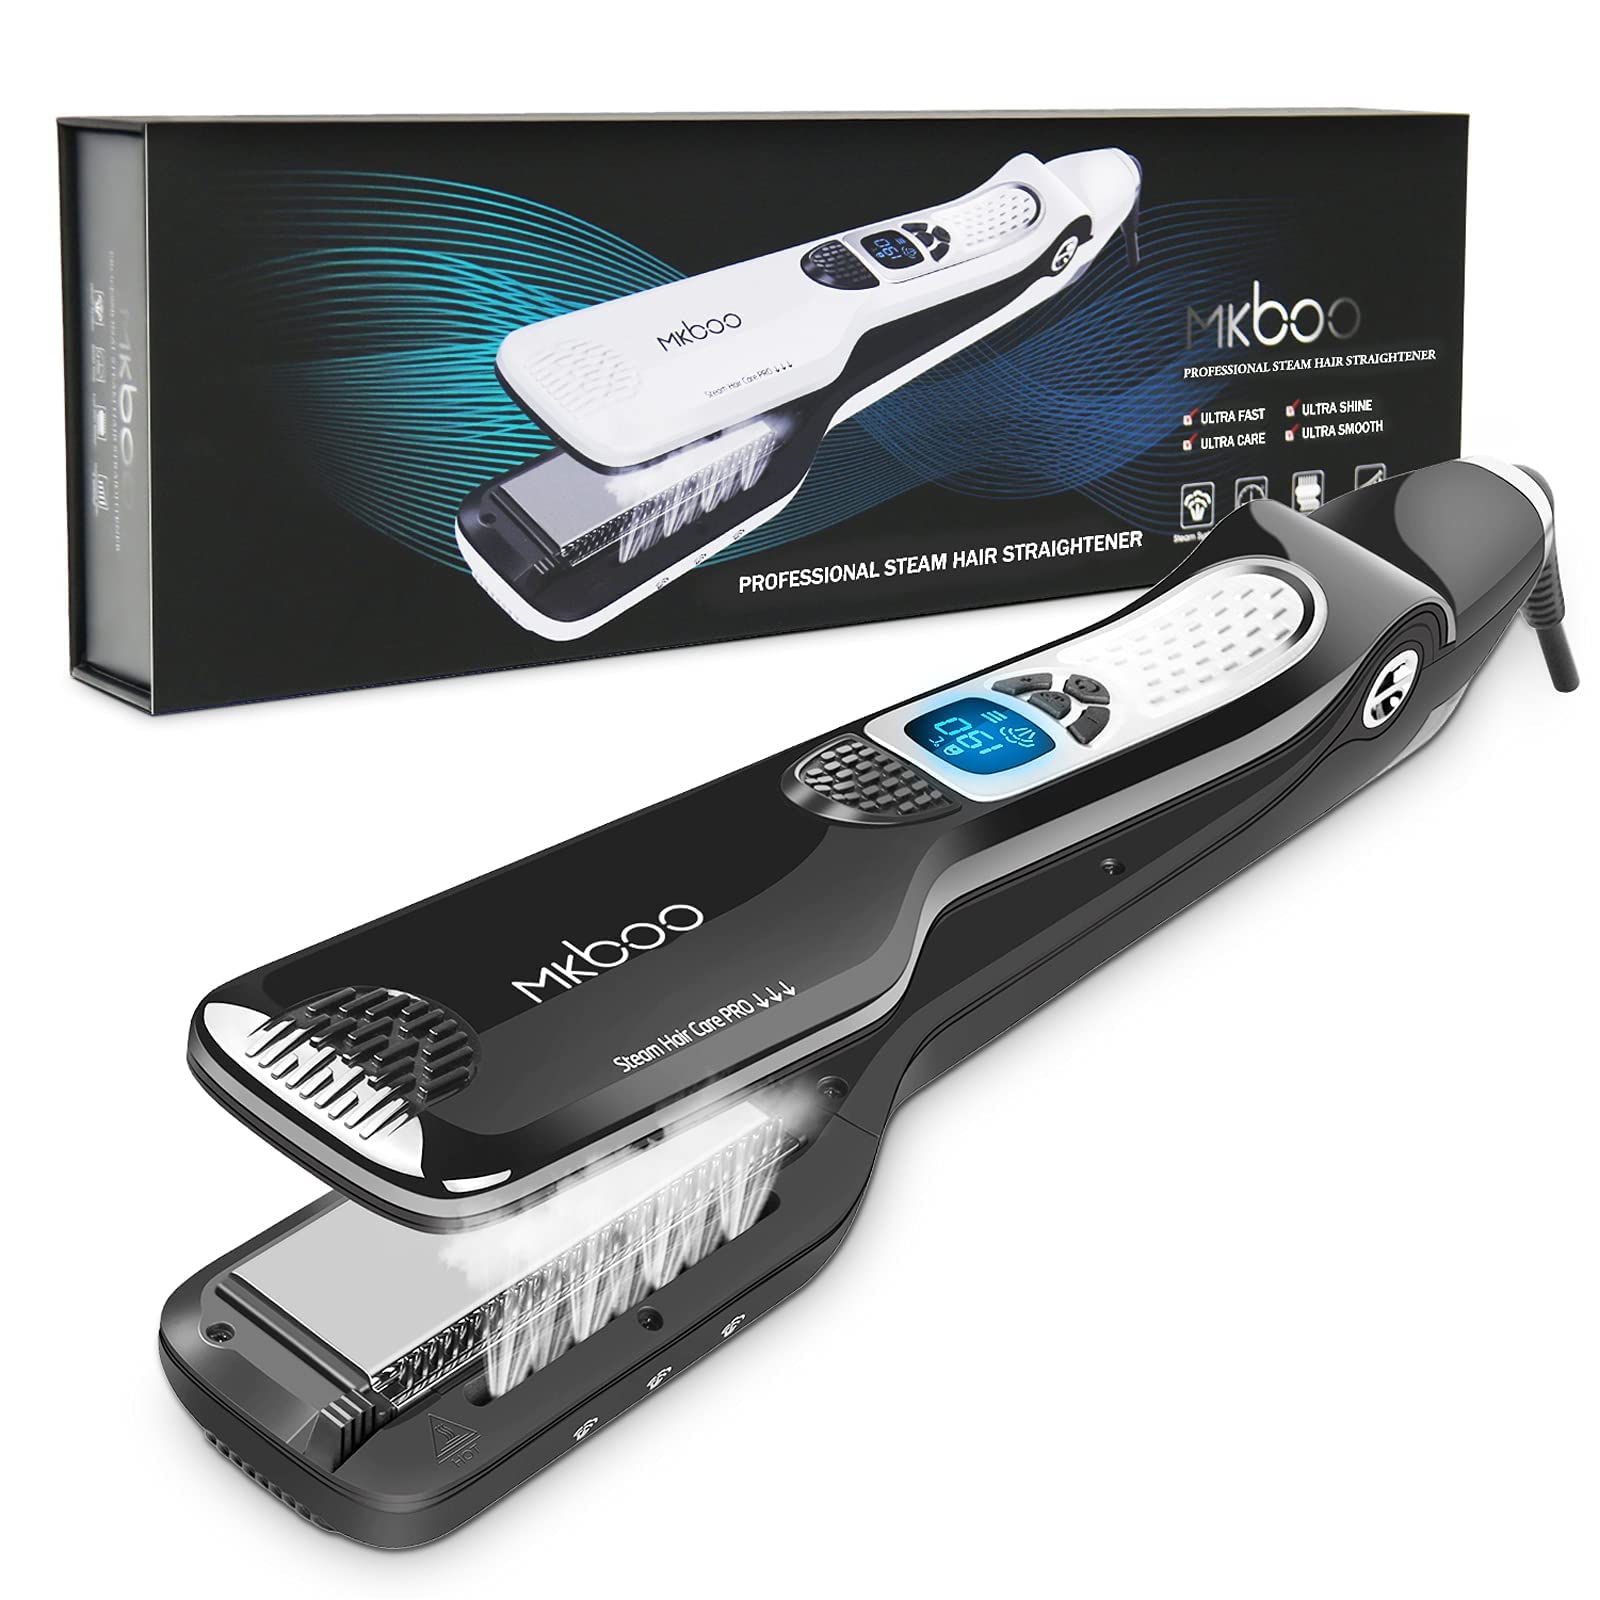 MKBOO Hair Straightener with Steam, Salon Professional Nano Titanium Ceramic Steam Flat Iron with Removable Comb+Digital LCD+5 L